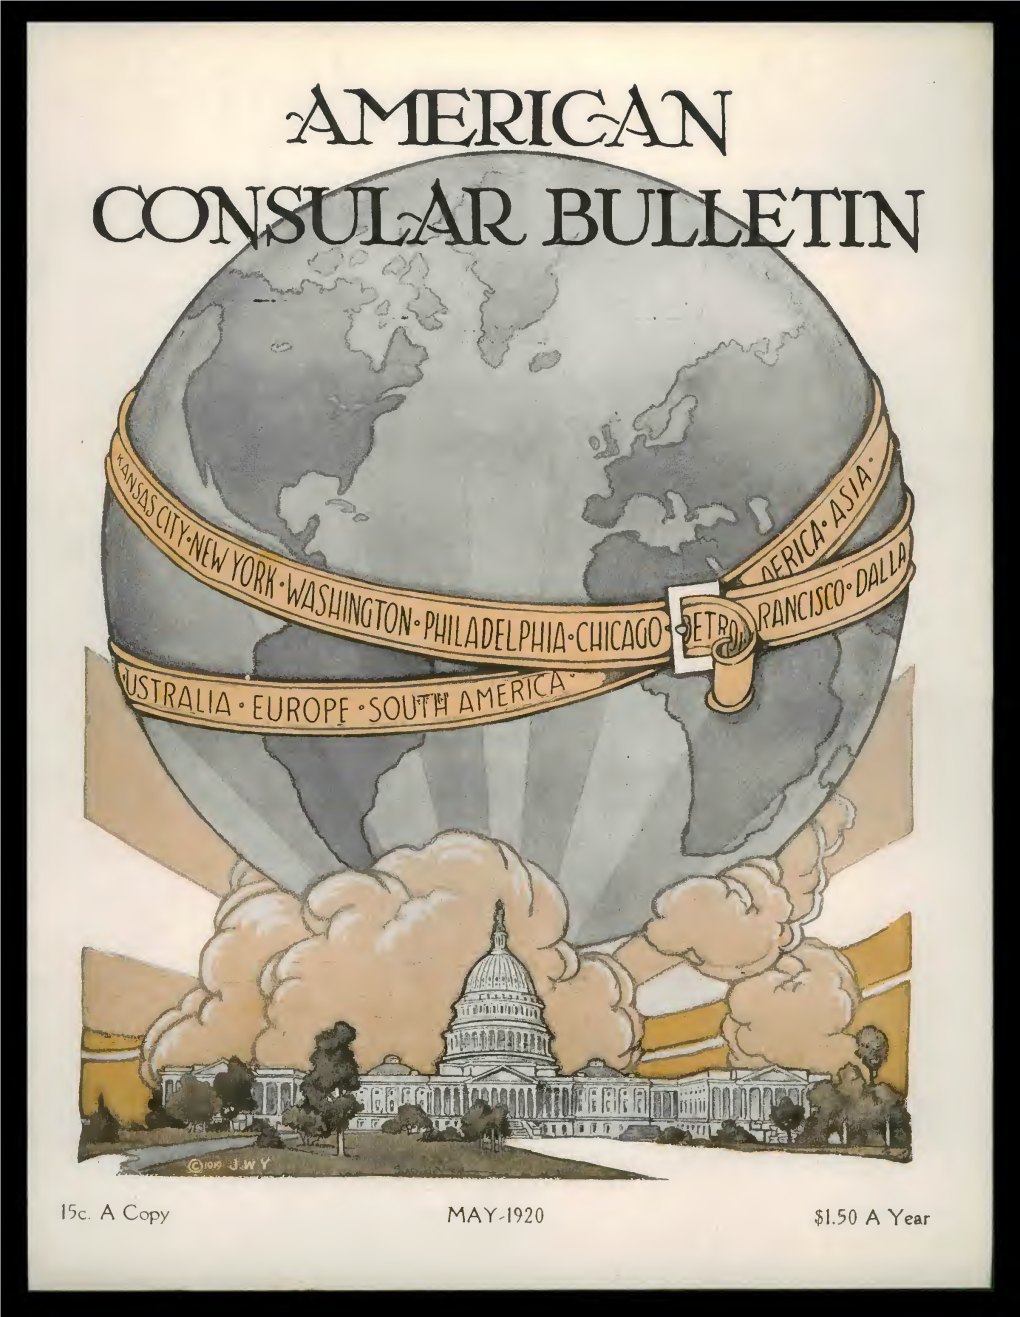 The Foreign Service Journal, May 1920 (American Consular Bulletin)